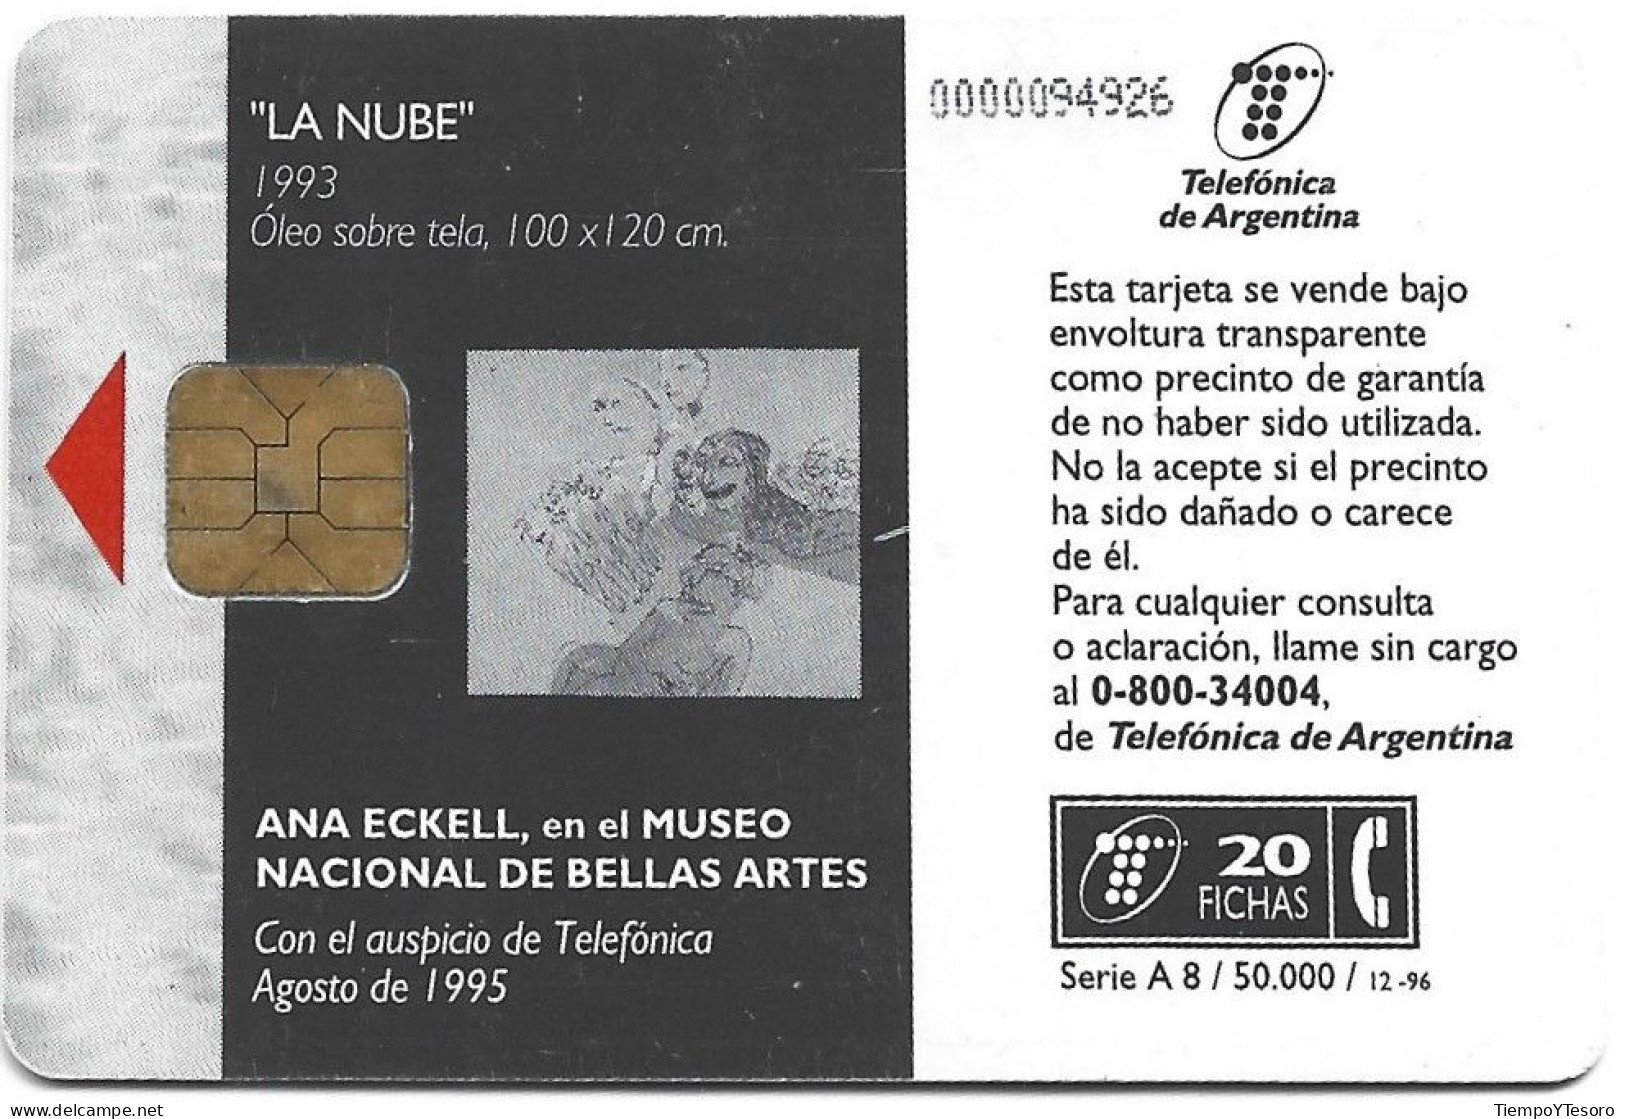 Phonecard - Argentina, Ana Eckell Painting, N°1124 - Collections